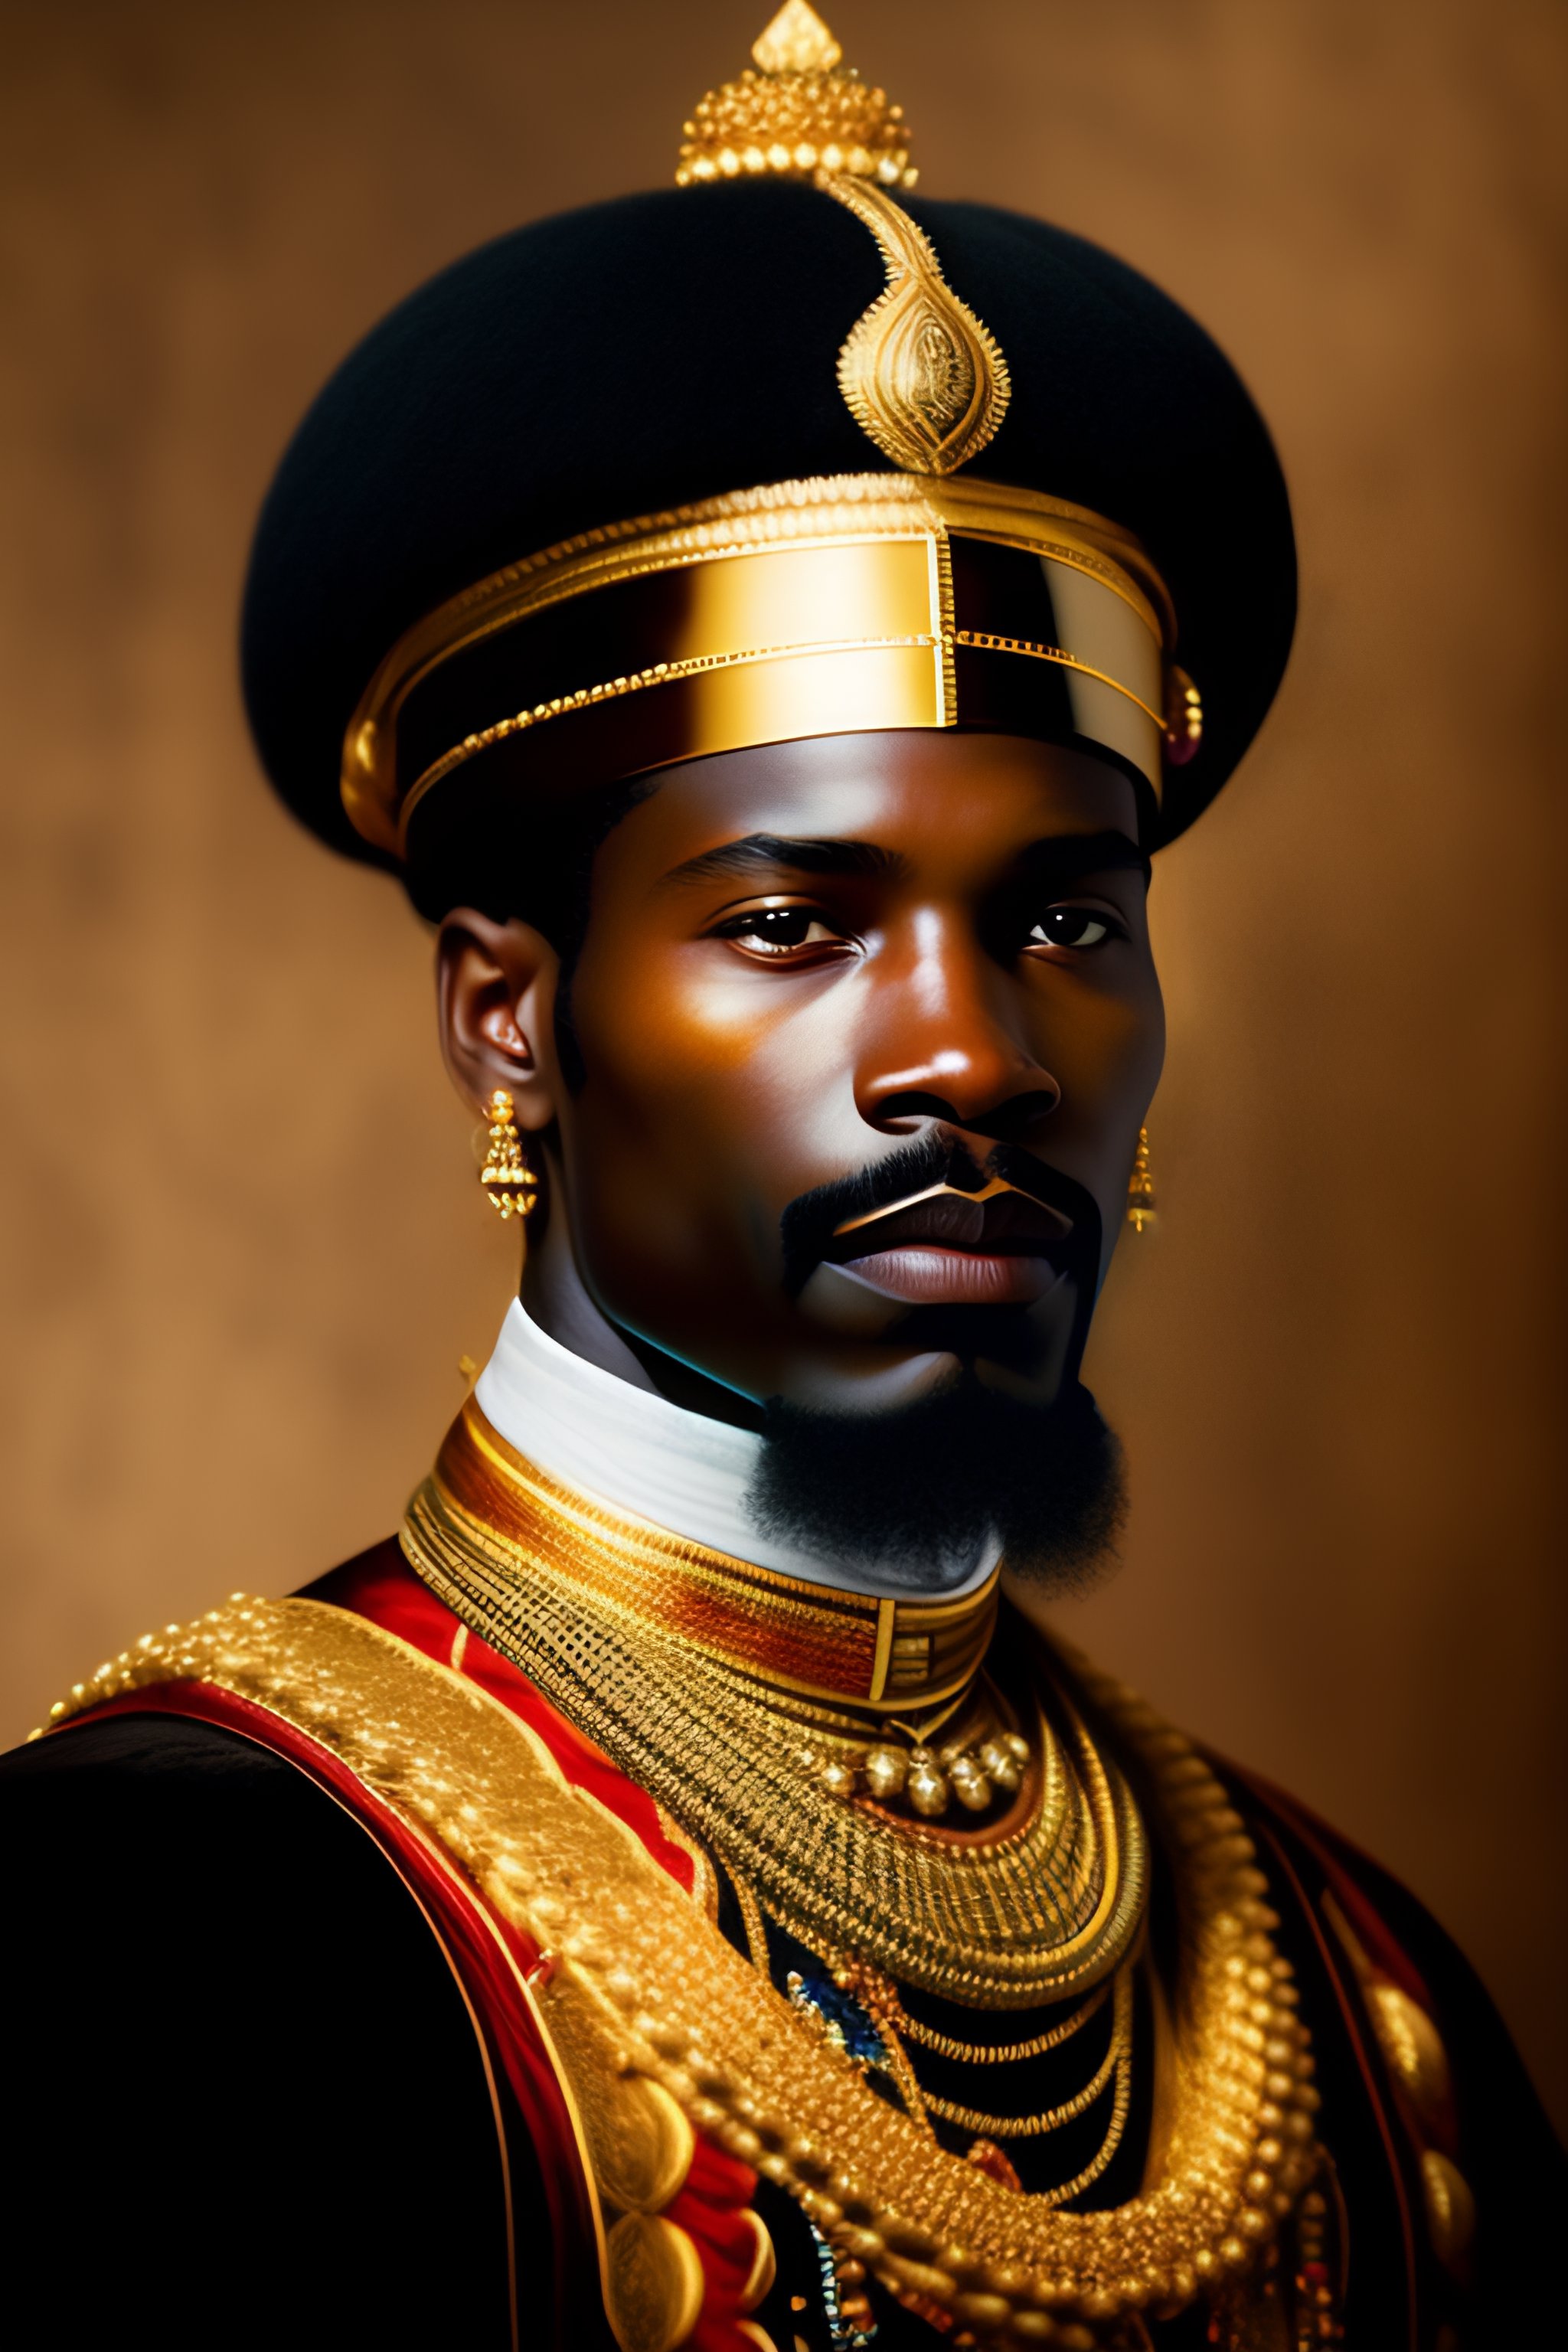 Lexica Portrait Of Strong Afro African King Dressed In Gold Ornaments